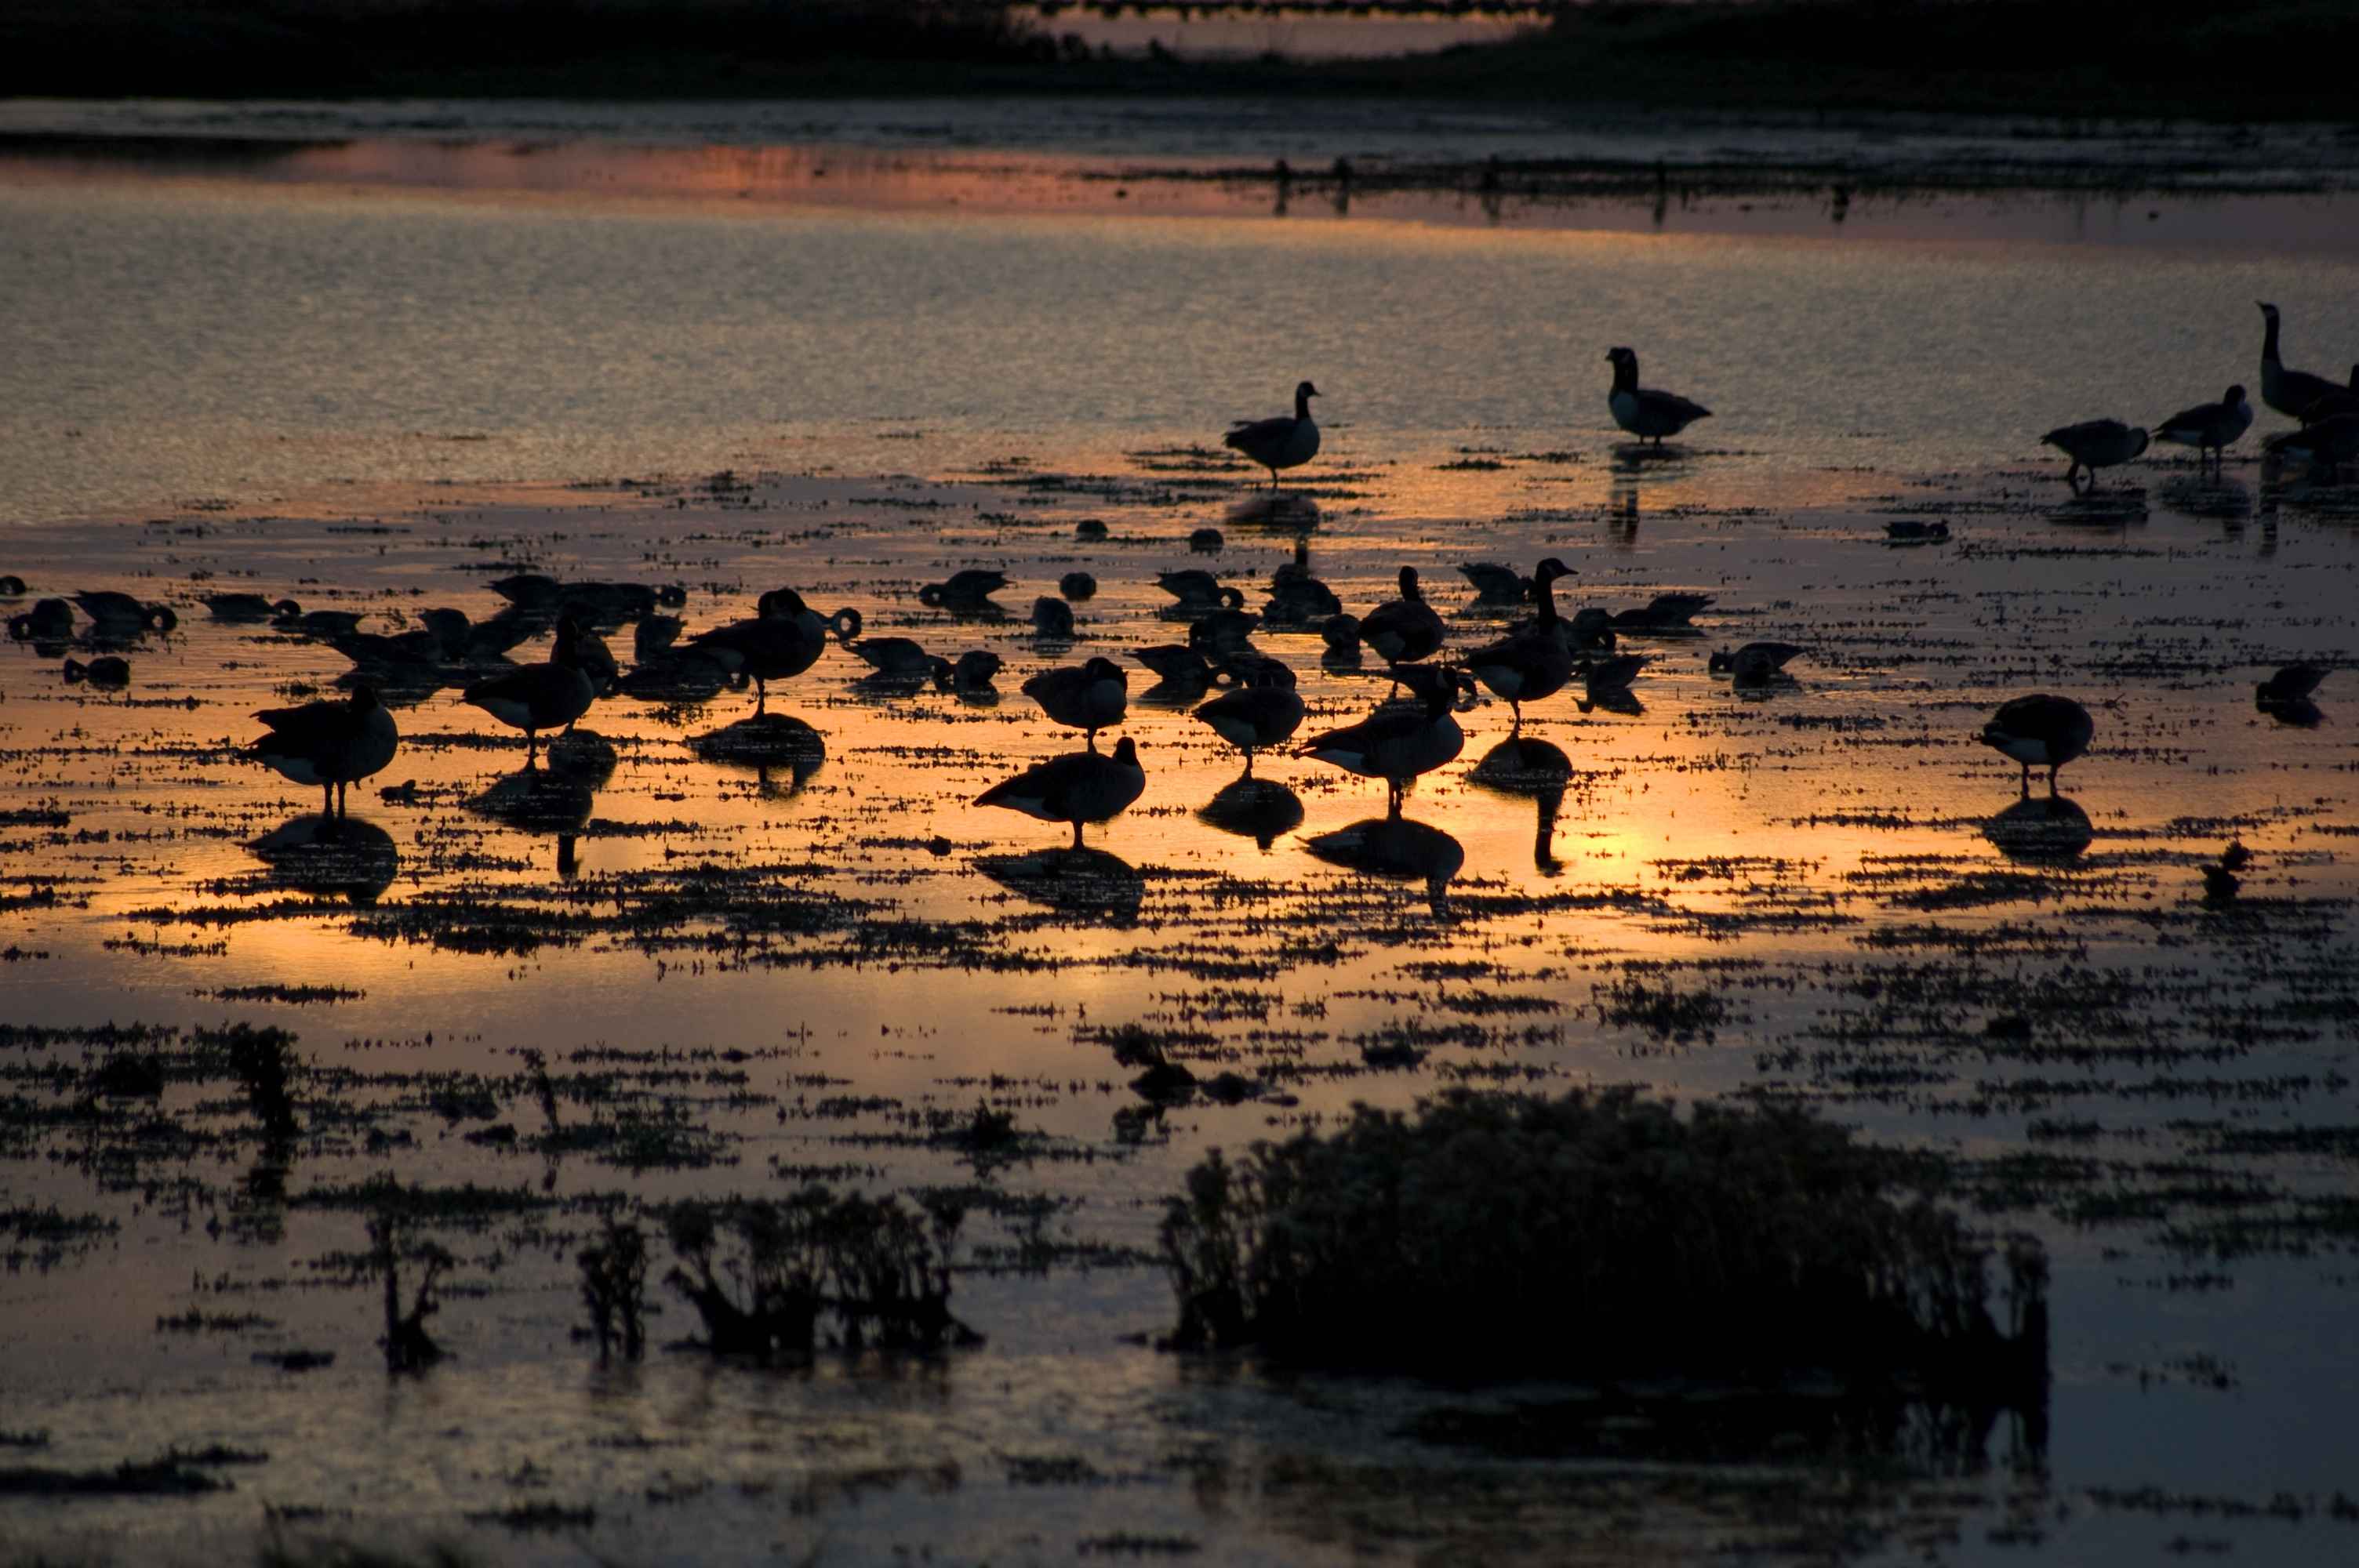 A view of various birds at sunset